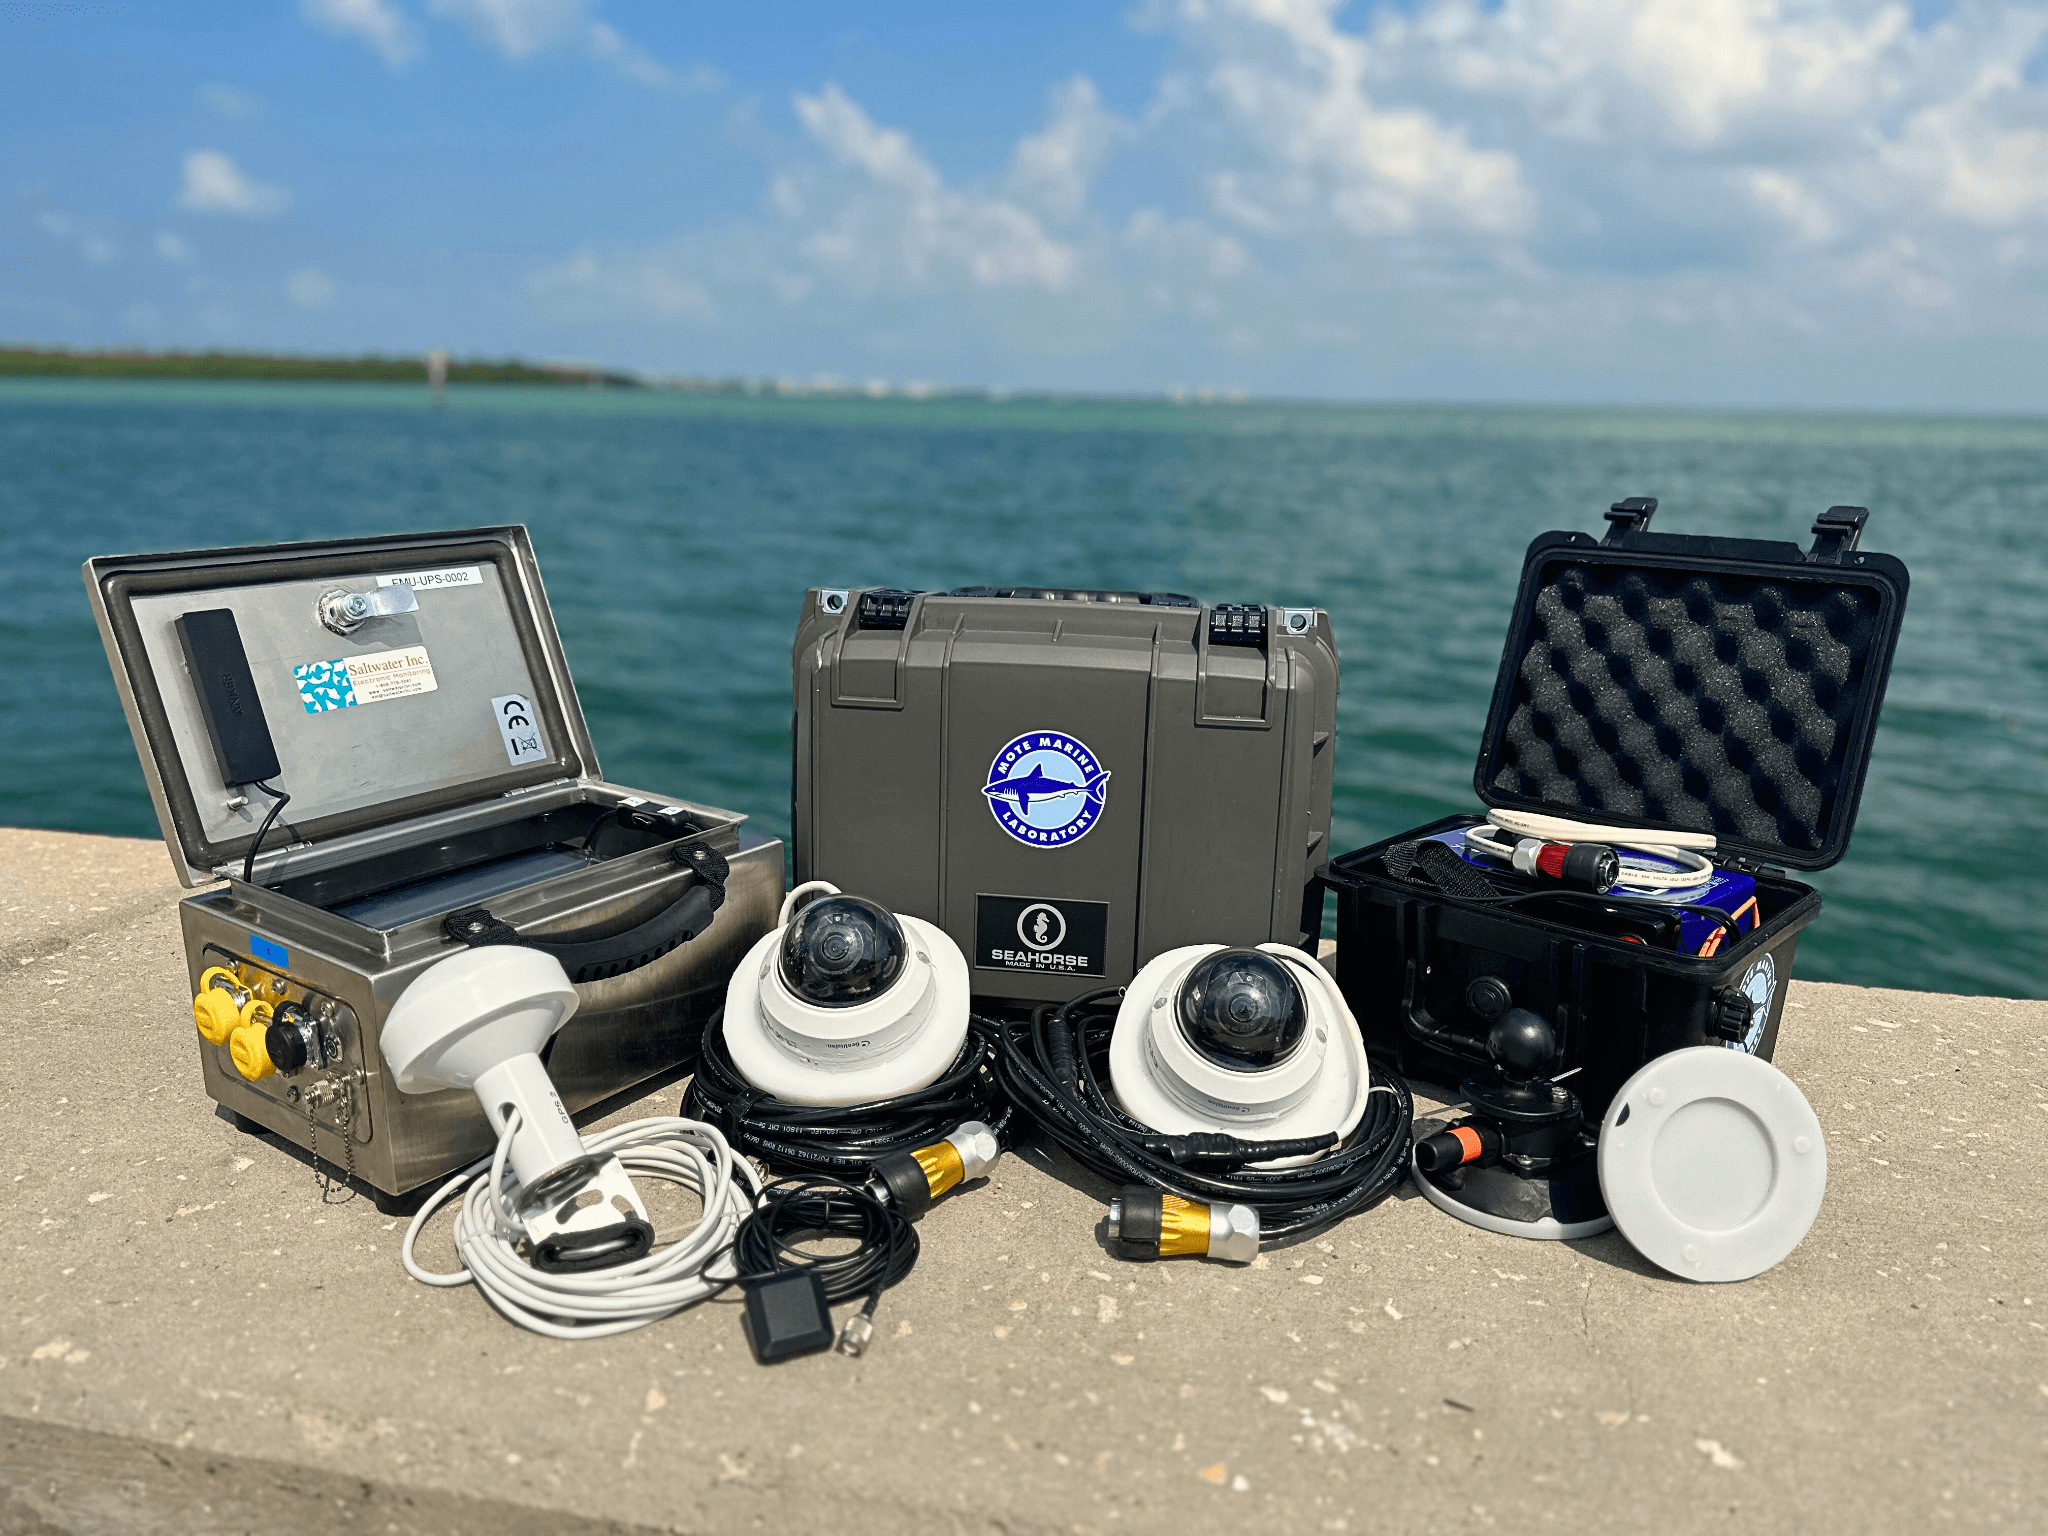 Left to right: Portable electronic monitoring unit case with processor and monitor, GPS, cameras, marine battery, a SeaSucker vacuum camera mount